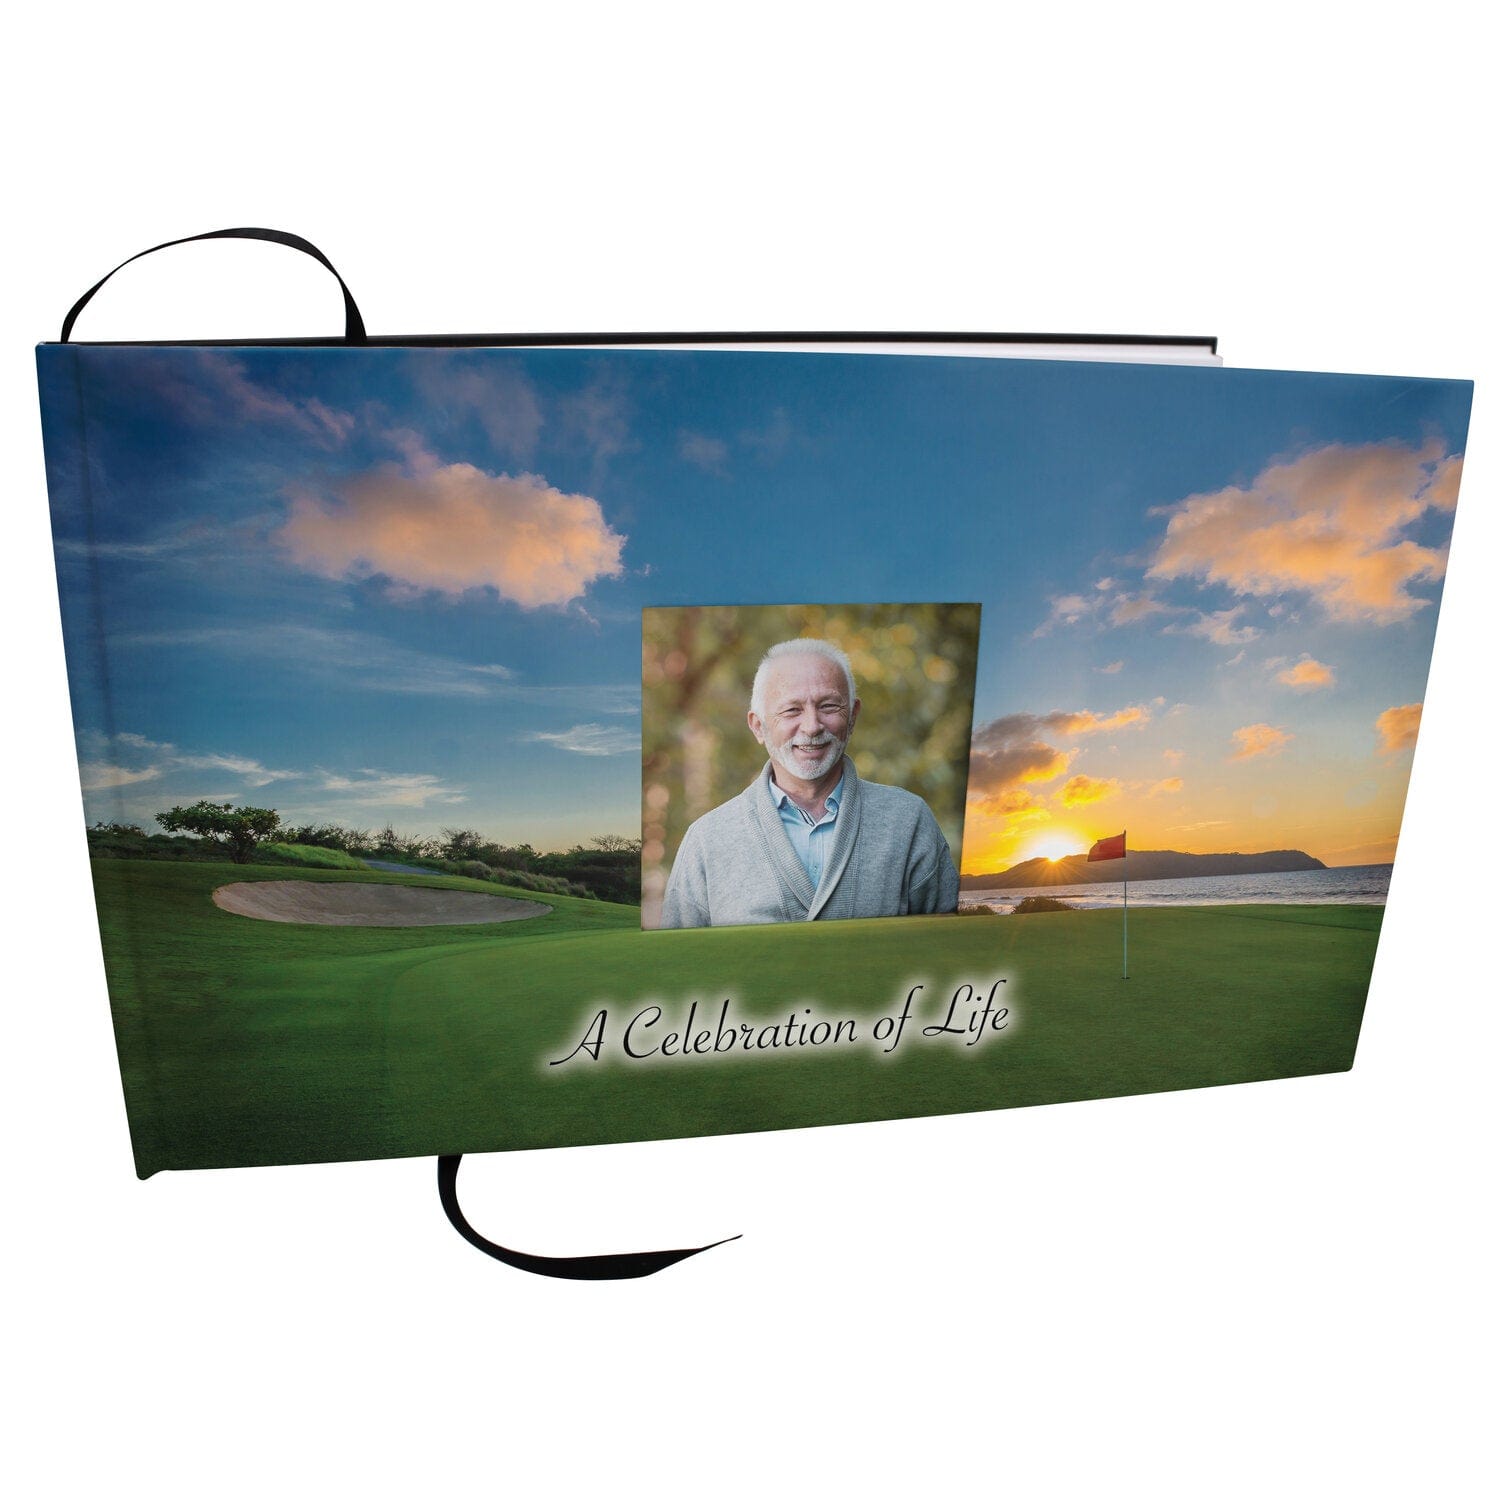 Commemorative Cremation Urns Home & Garden 19th Hole Golf Matching Themed 'Celebration of Life' Guest Book for Funeral or Memorial Service